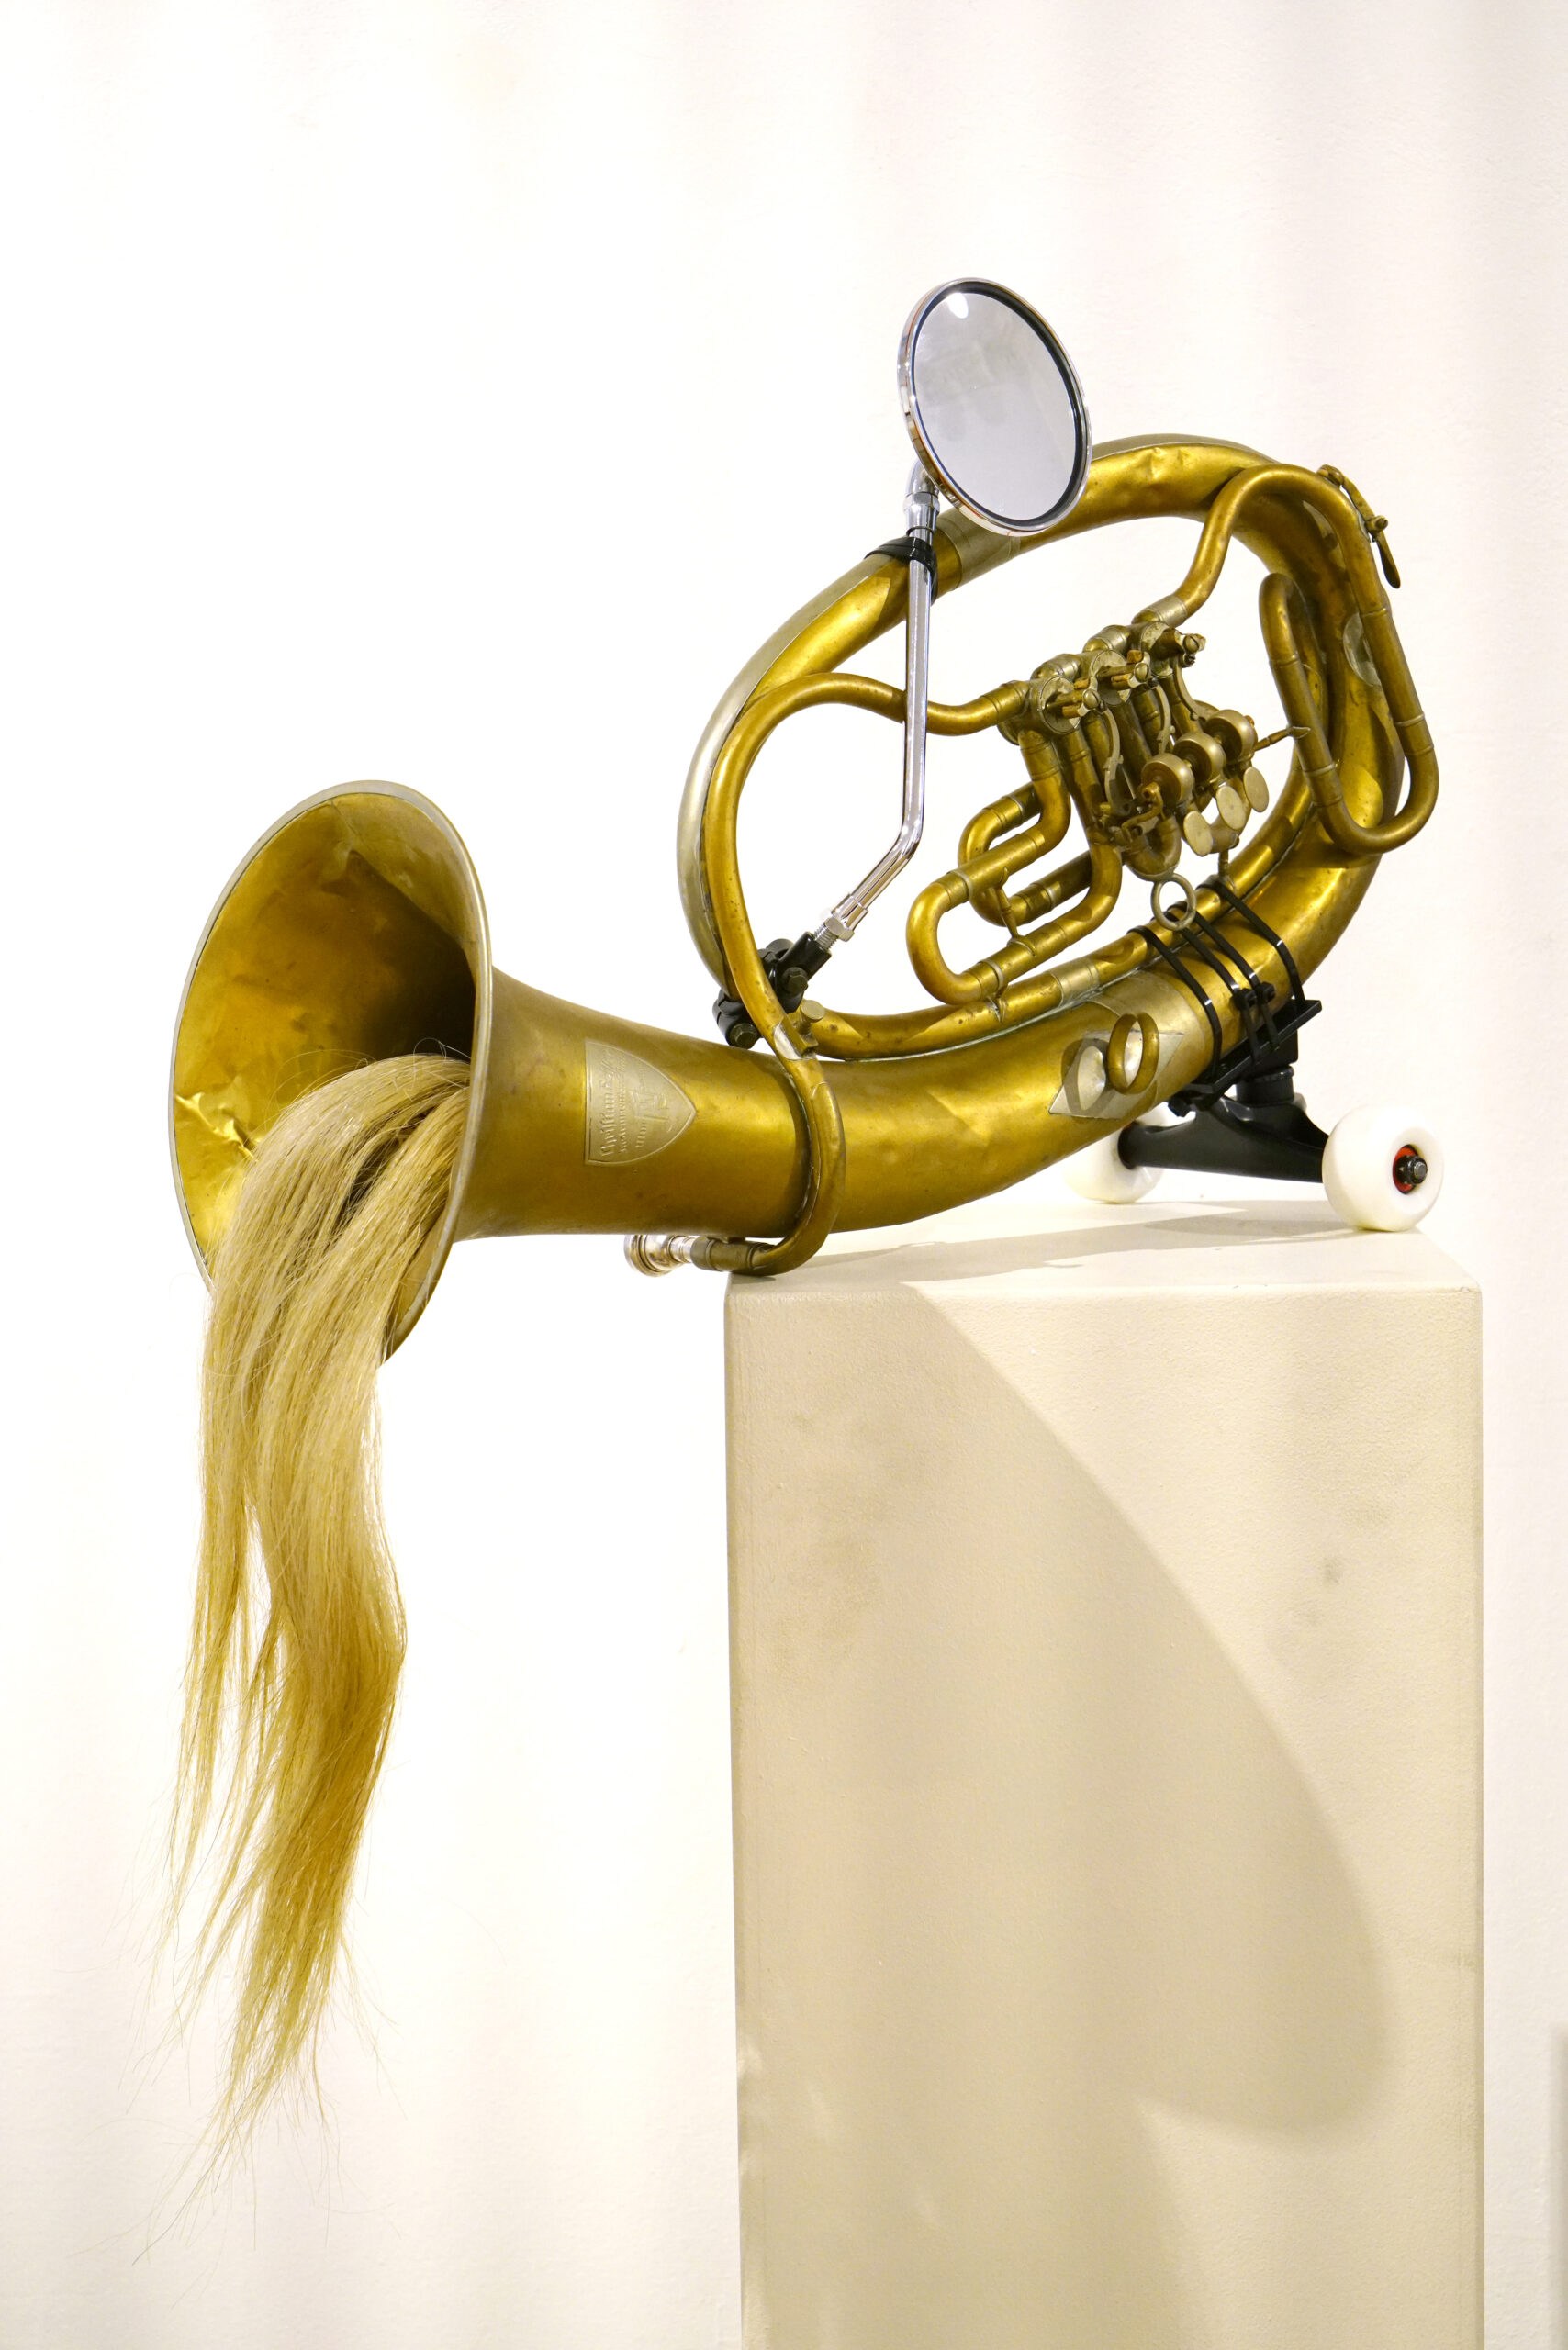 A surreal-looking piece of artwork includes a brass instrument with hair coming out of its bell